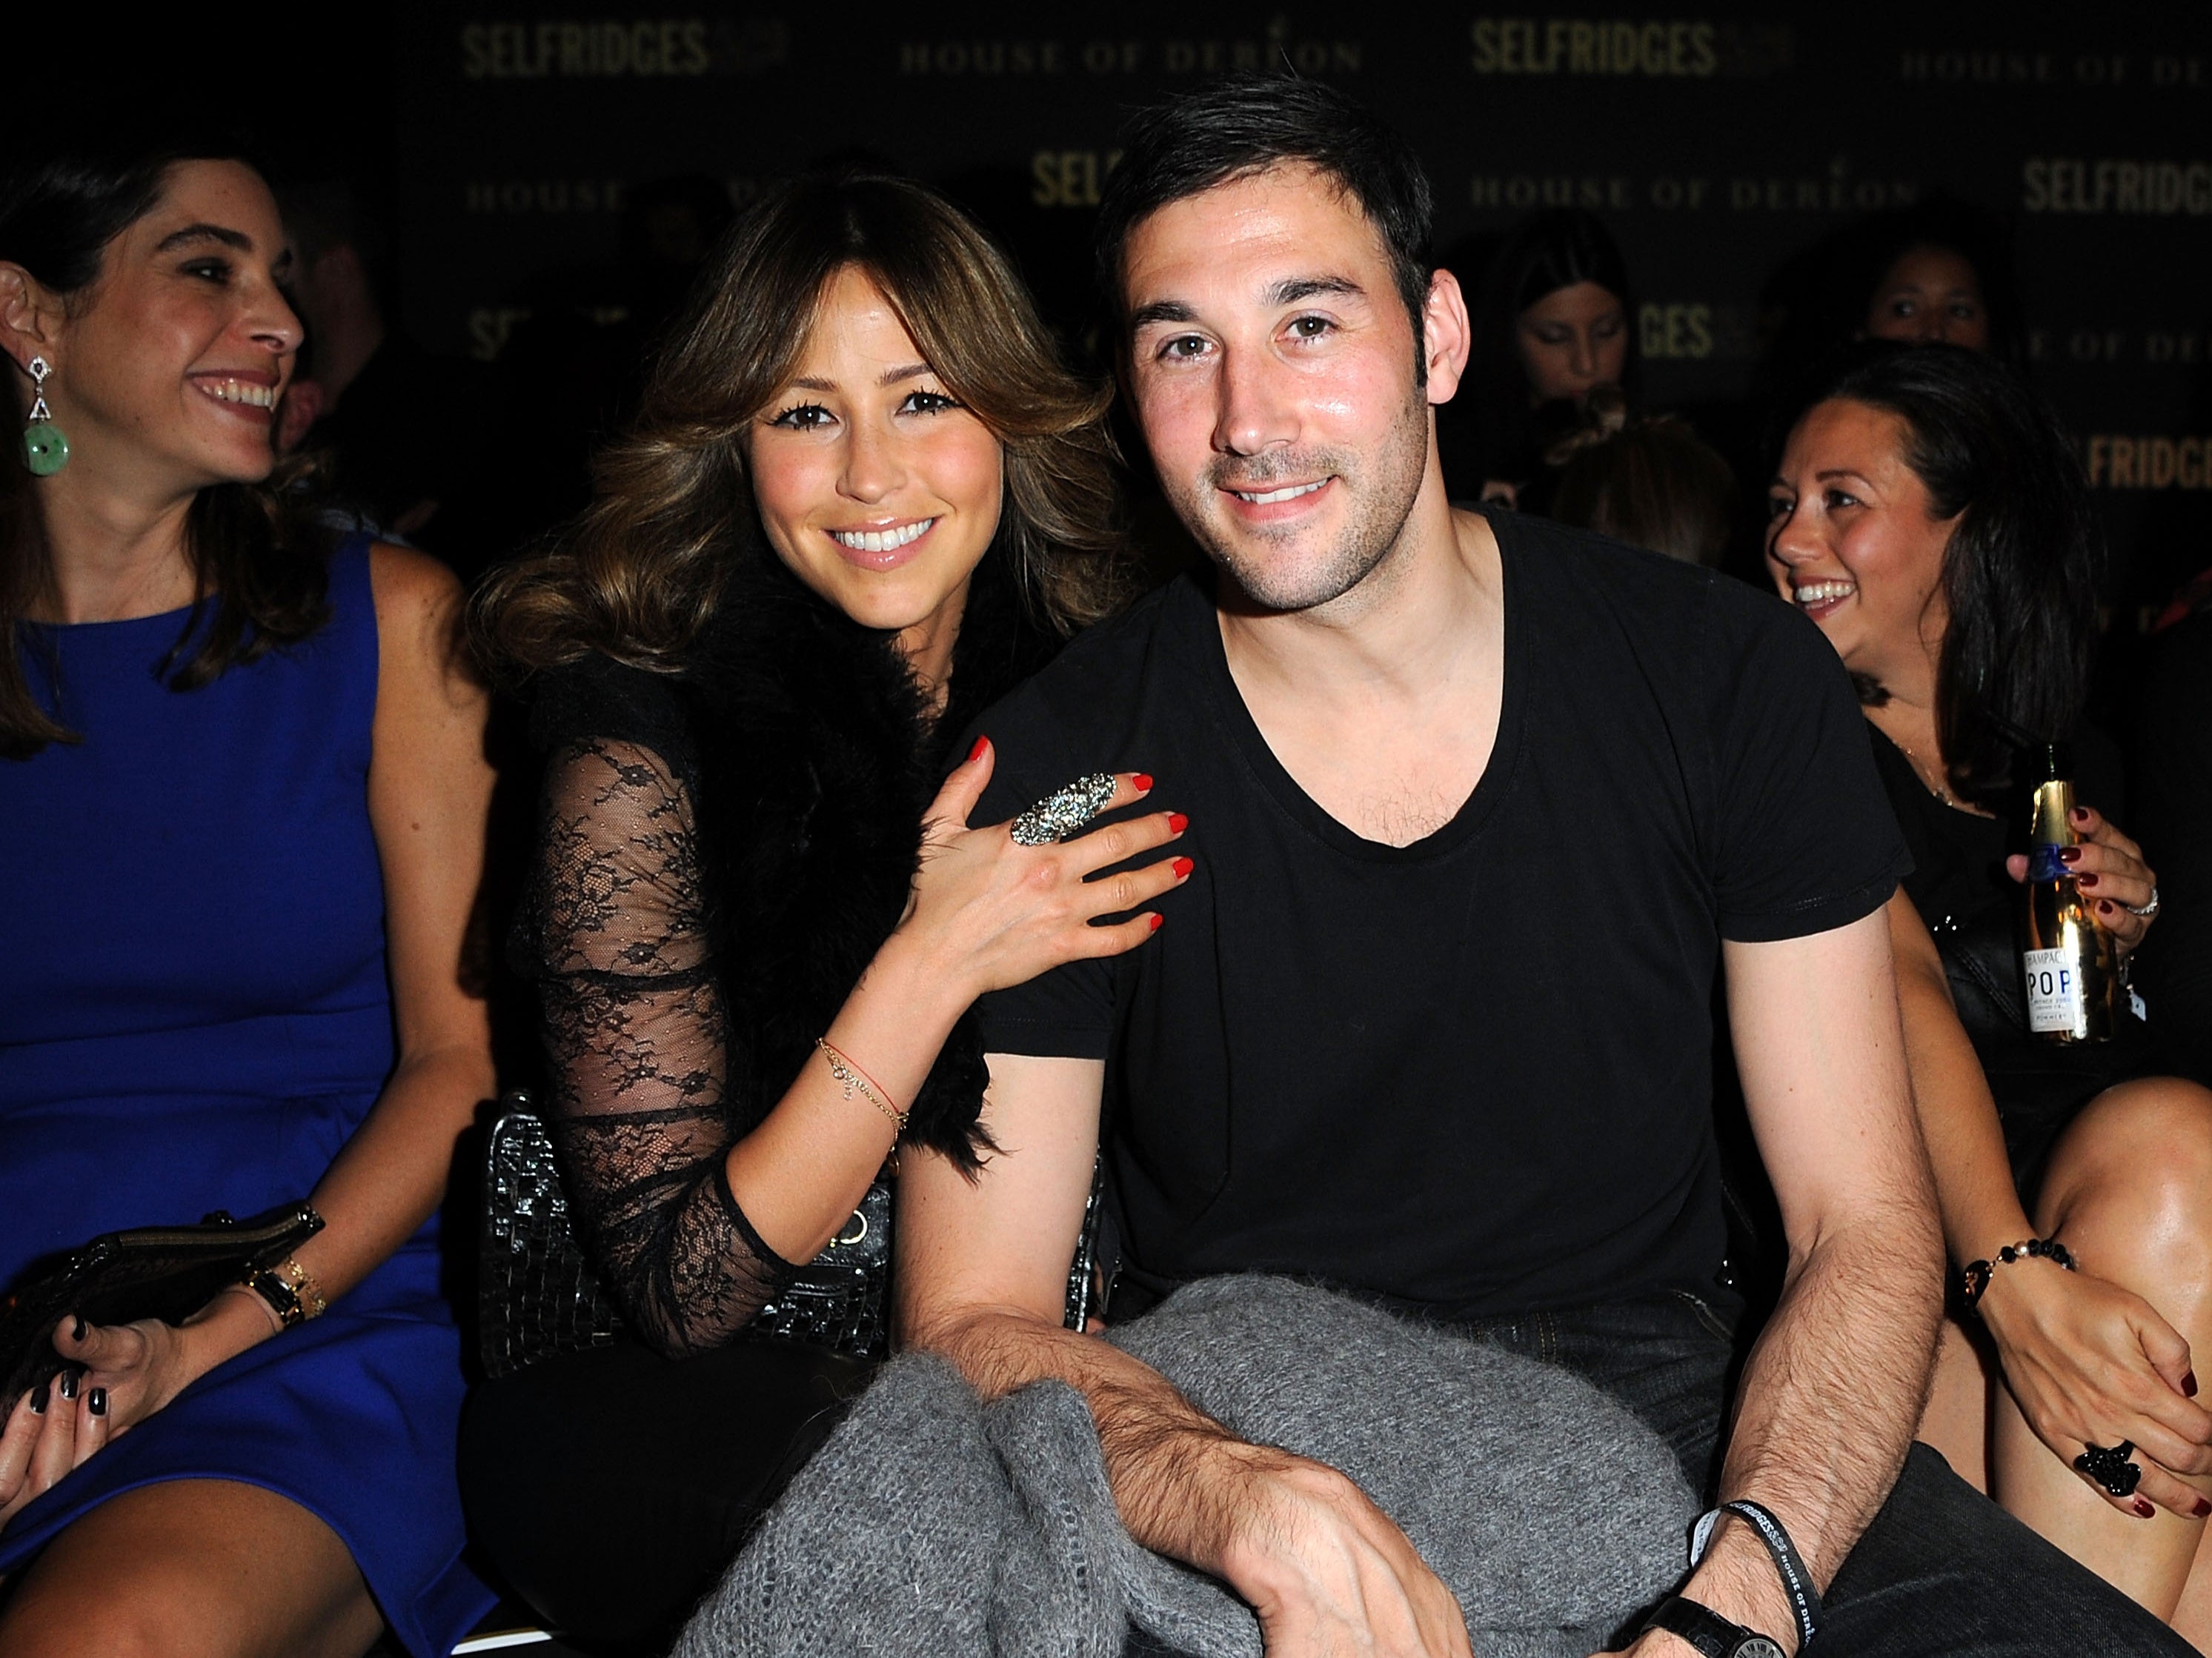 Rachel Stevens and Husband Alex Bourne at The Launch Of House Of Dereon By Beyonce And Tina Knowles at Selfridges on September 17, 2011